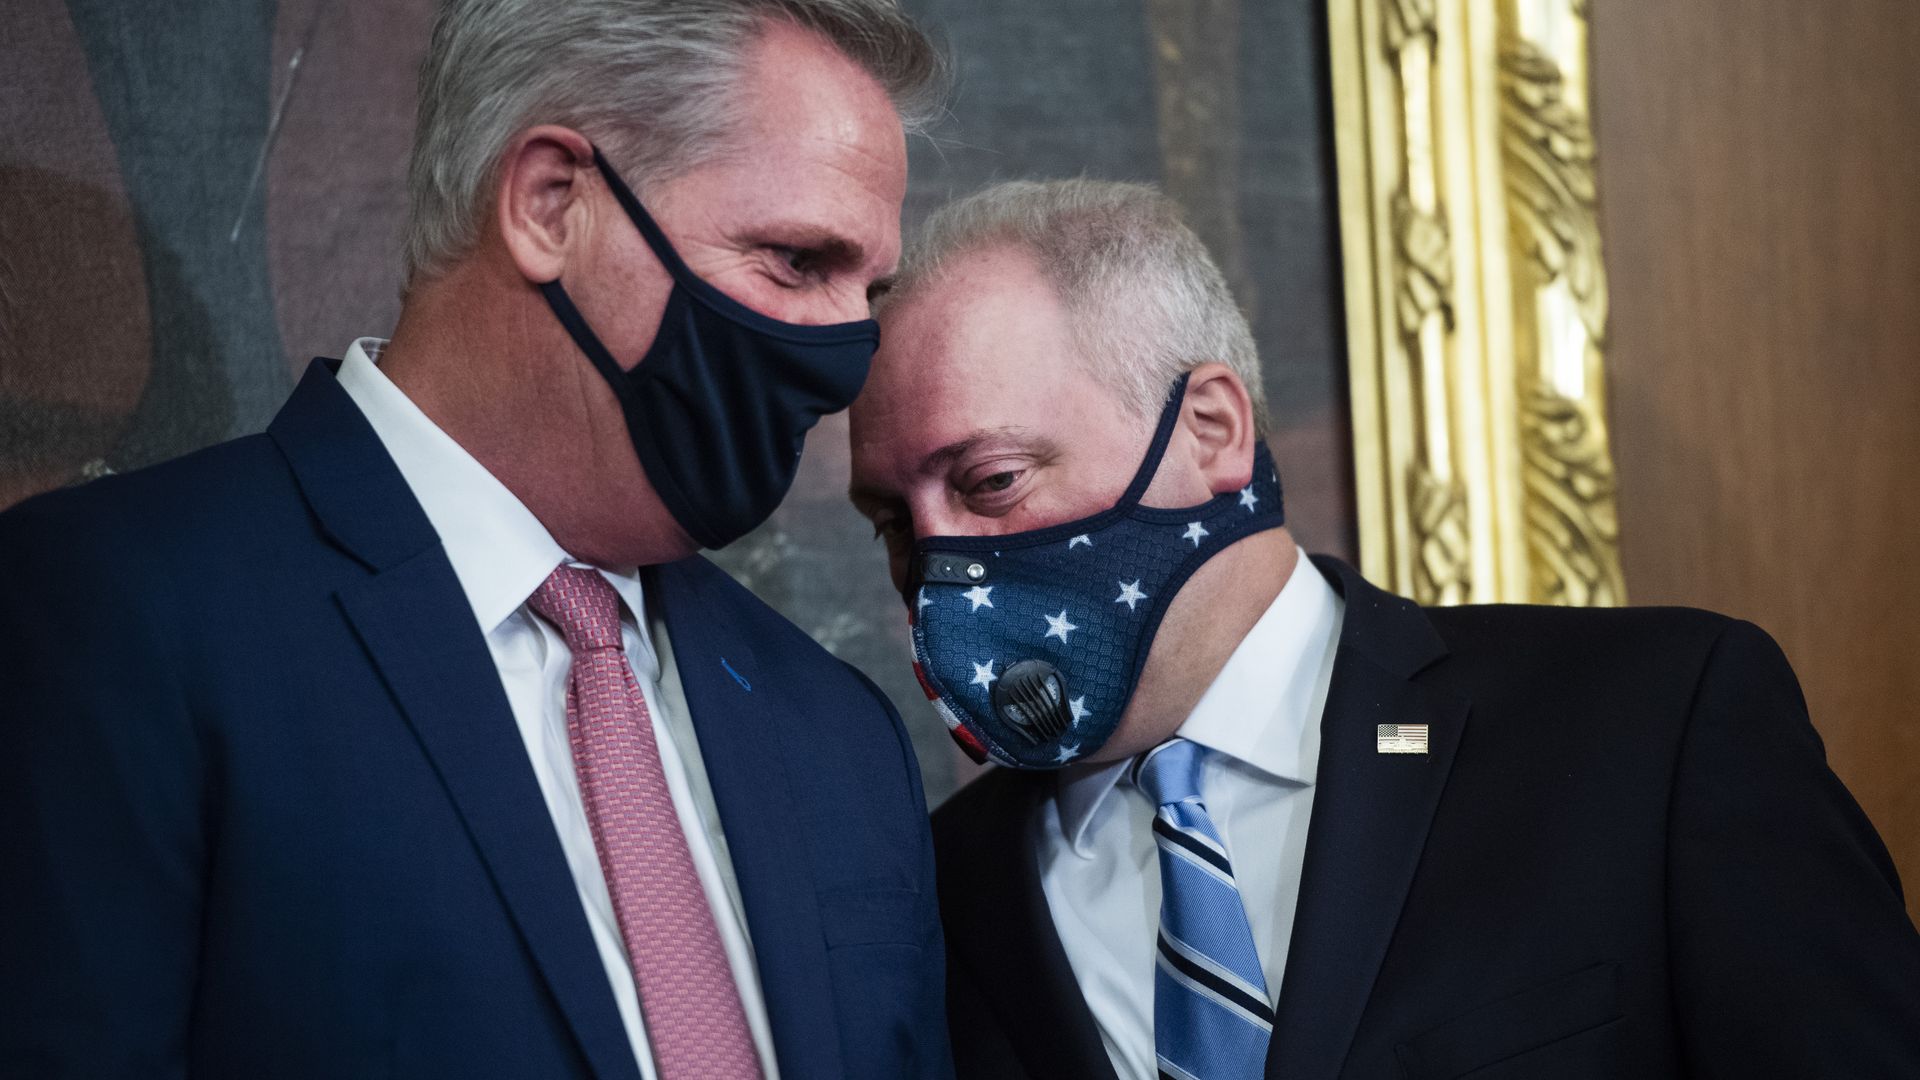 McCarthy and Scalise